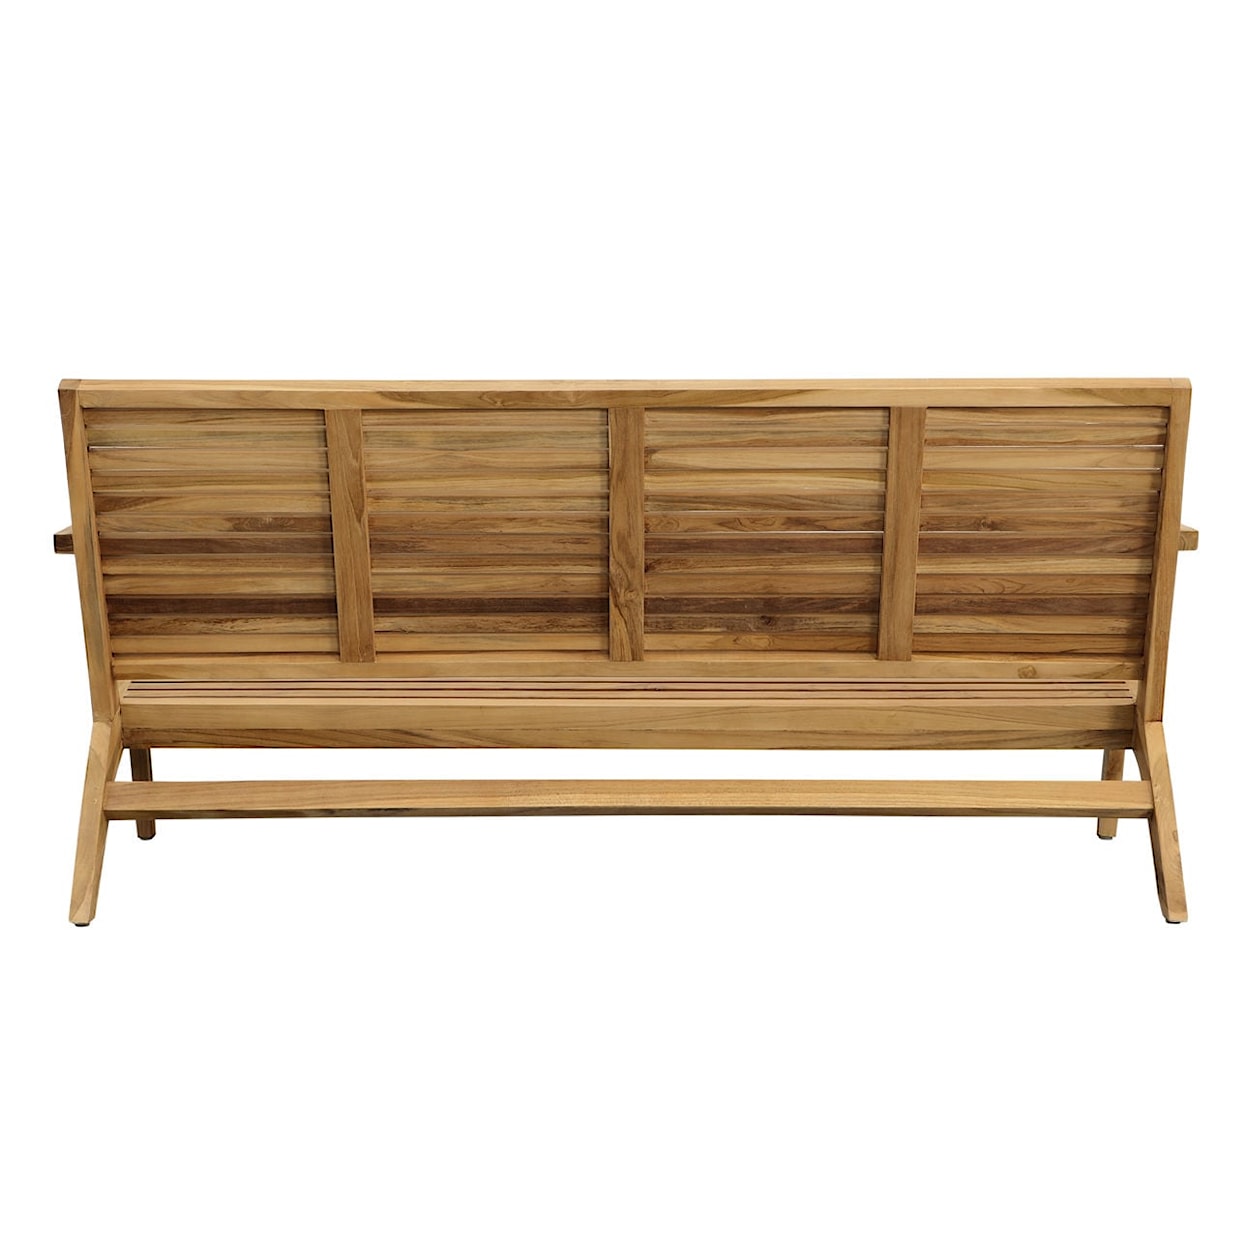 Dovetail Furniture Janine Outdoor Bench